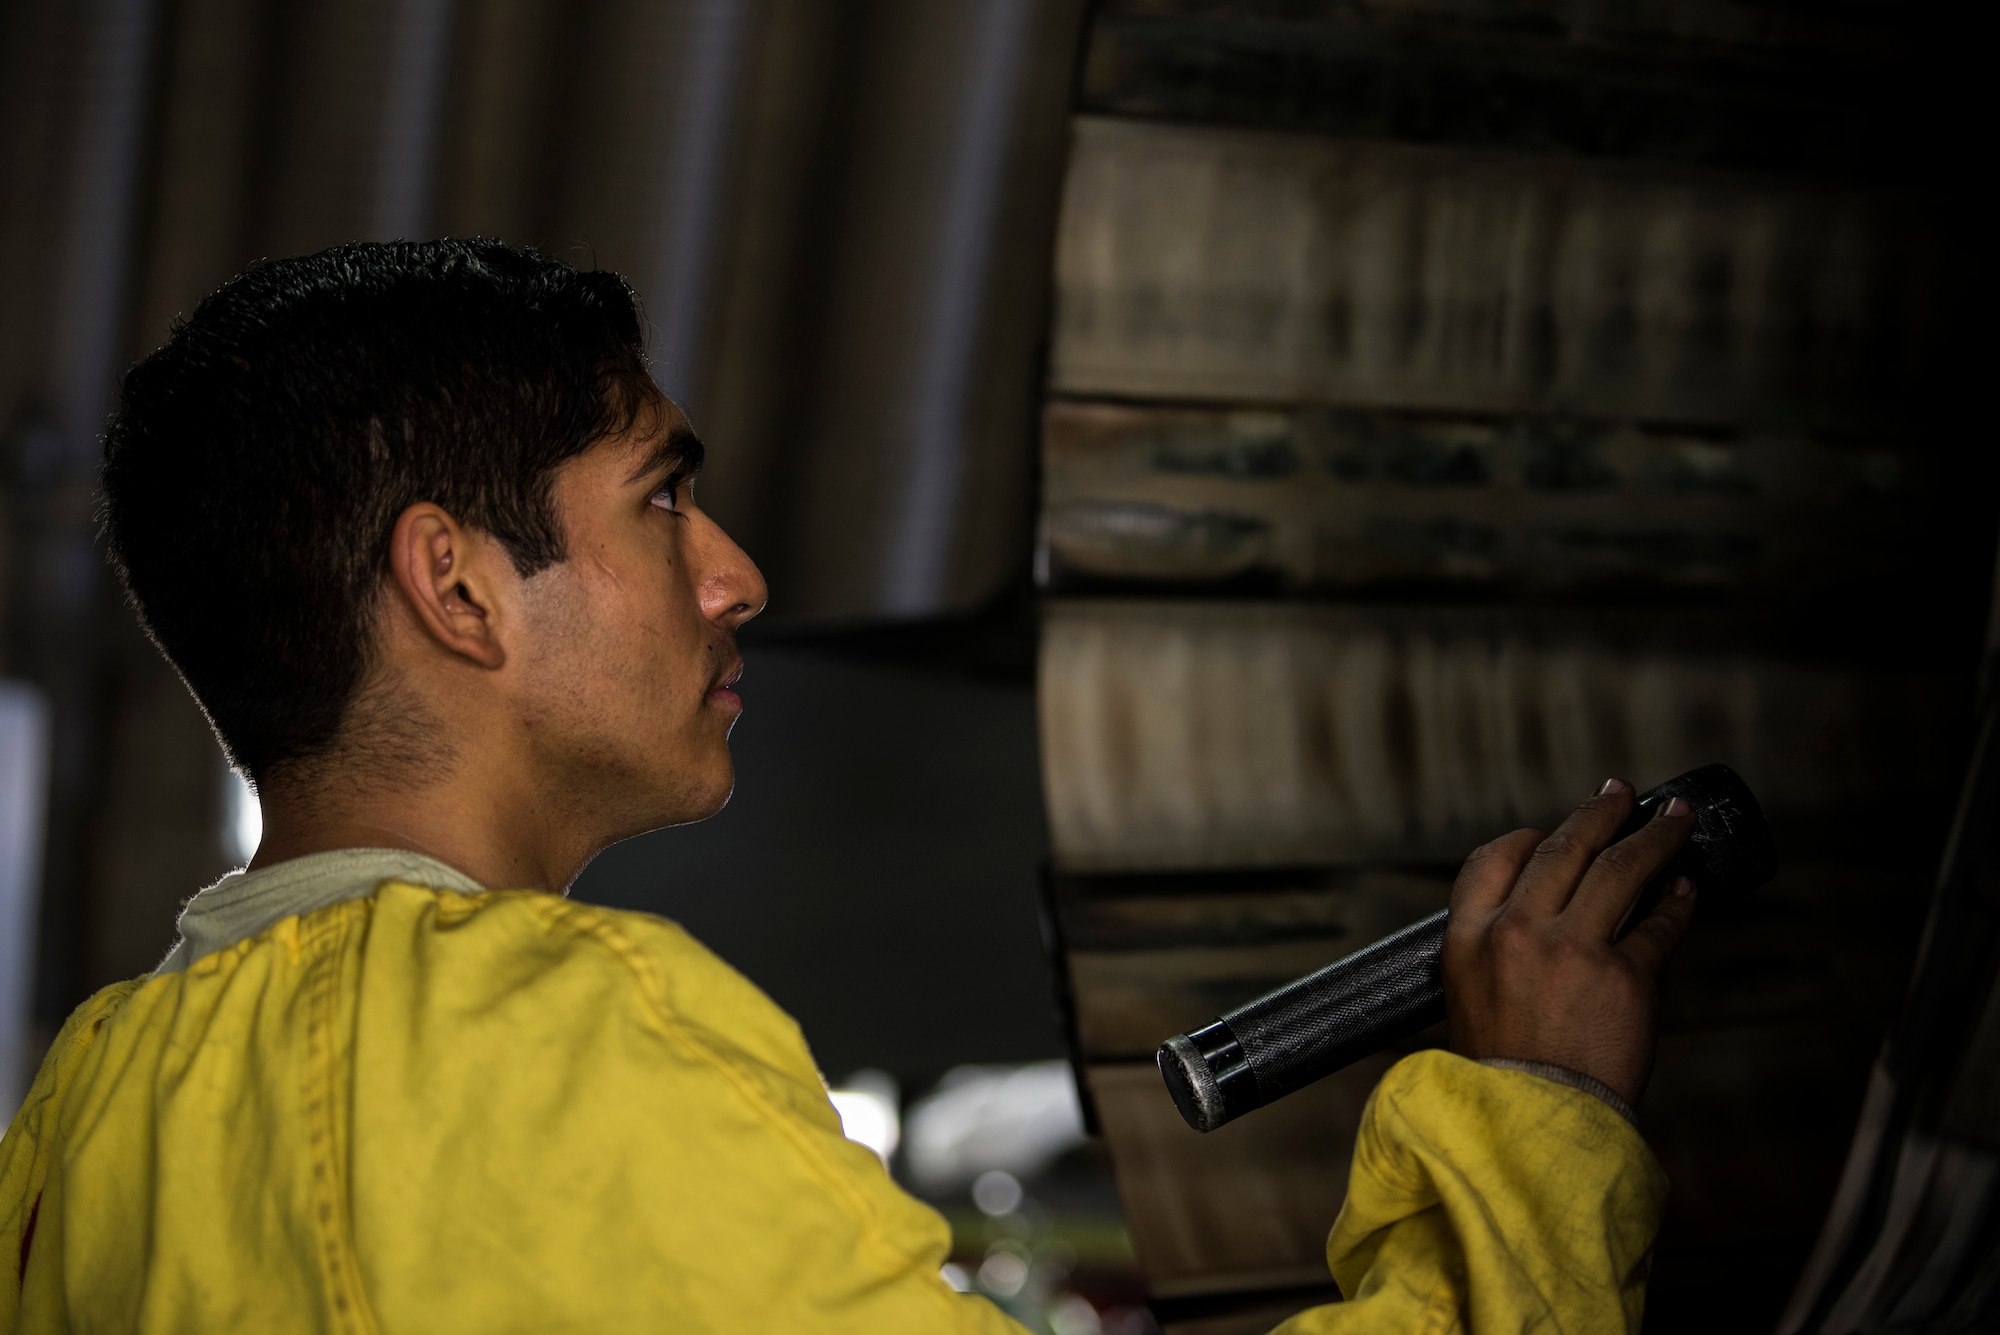 U.S. Air Force Staff Sgt. Martin Perez, 52nd Aircraft Maintenance Squadron tactical aircraft maintainer, inspects an F-16 Fighting Falcon exhaust at Spangdahlem Air Base, Germany, Sept. 13, 2018. Perez is certified to look for debris, foreign objects, damage, or leaks. F-16s are inspected after each flight. (U.S. Air Force photo by Airman 1st Class Valerie Seelye)